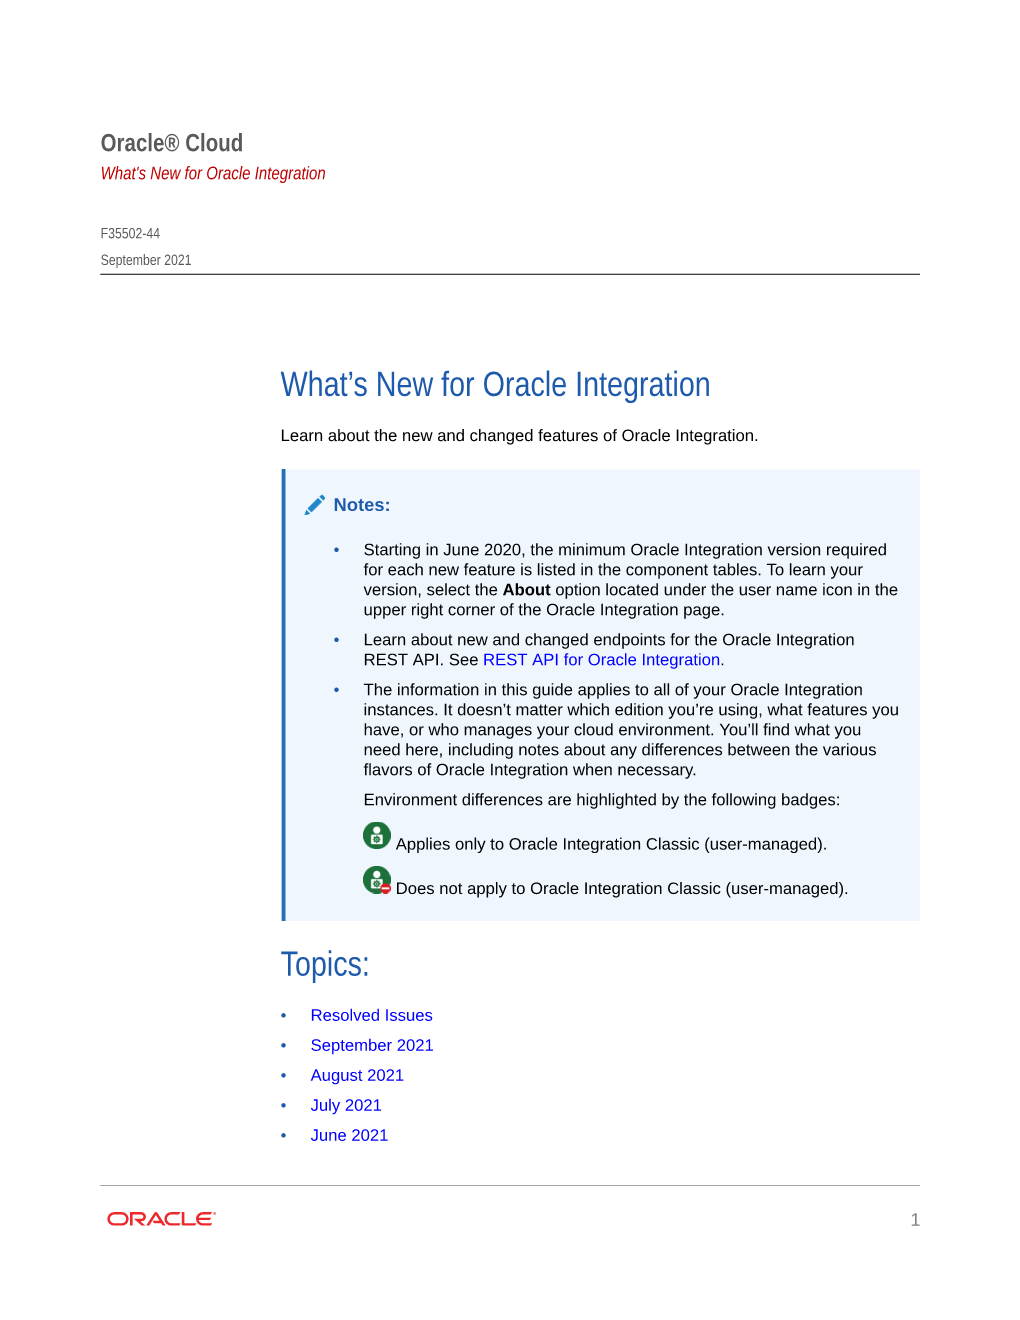 What's New for Oracle Integration